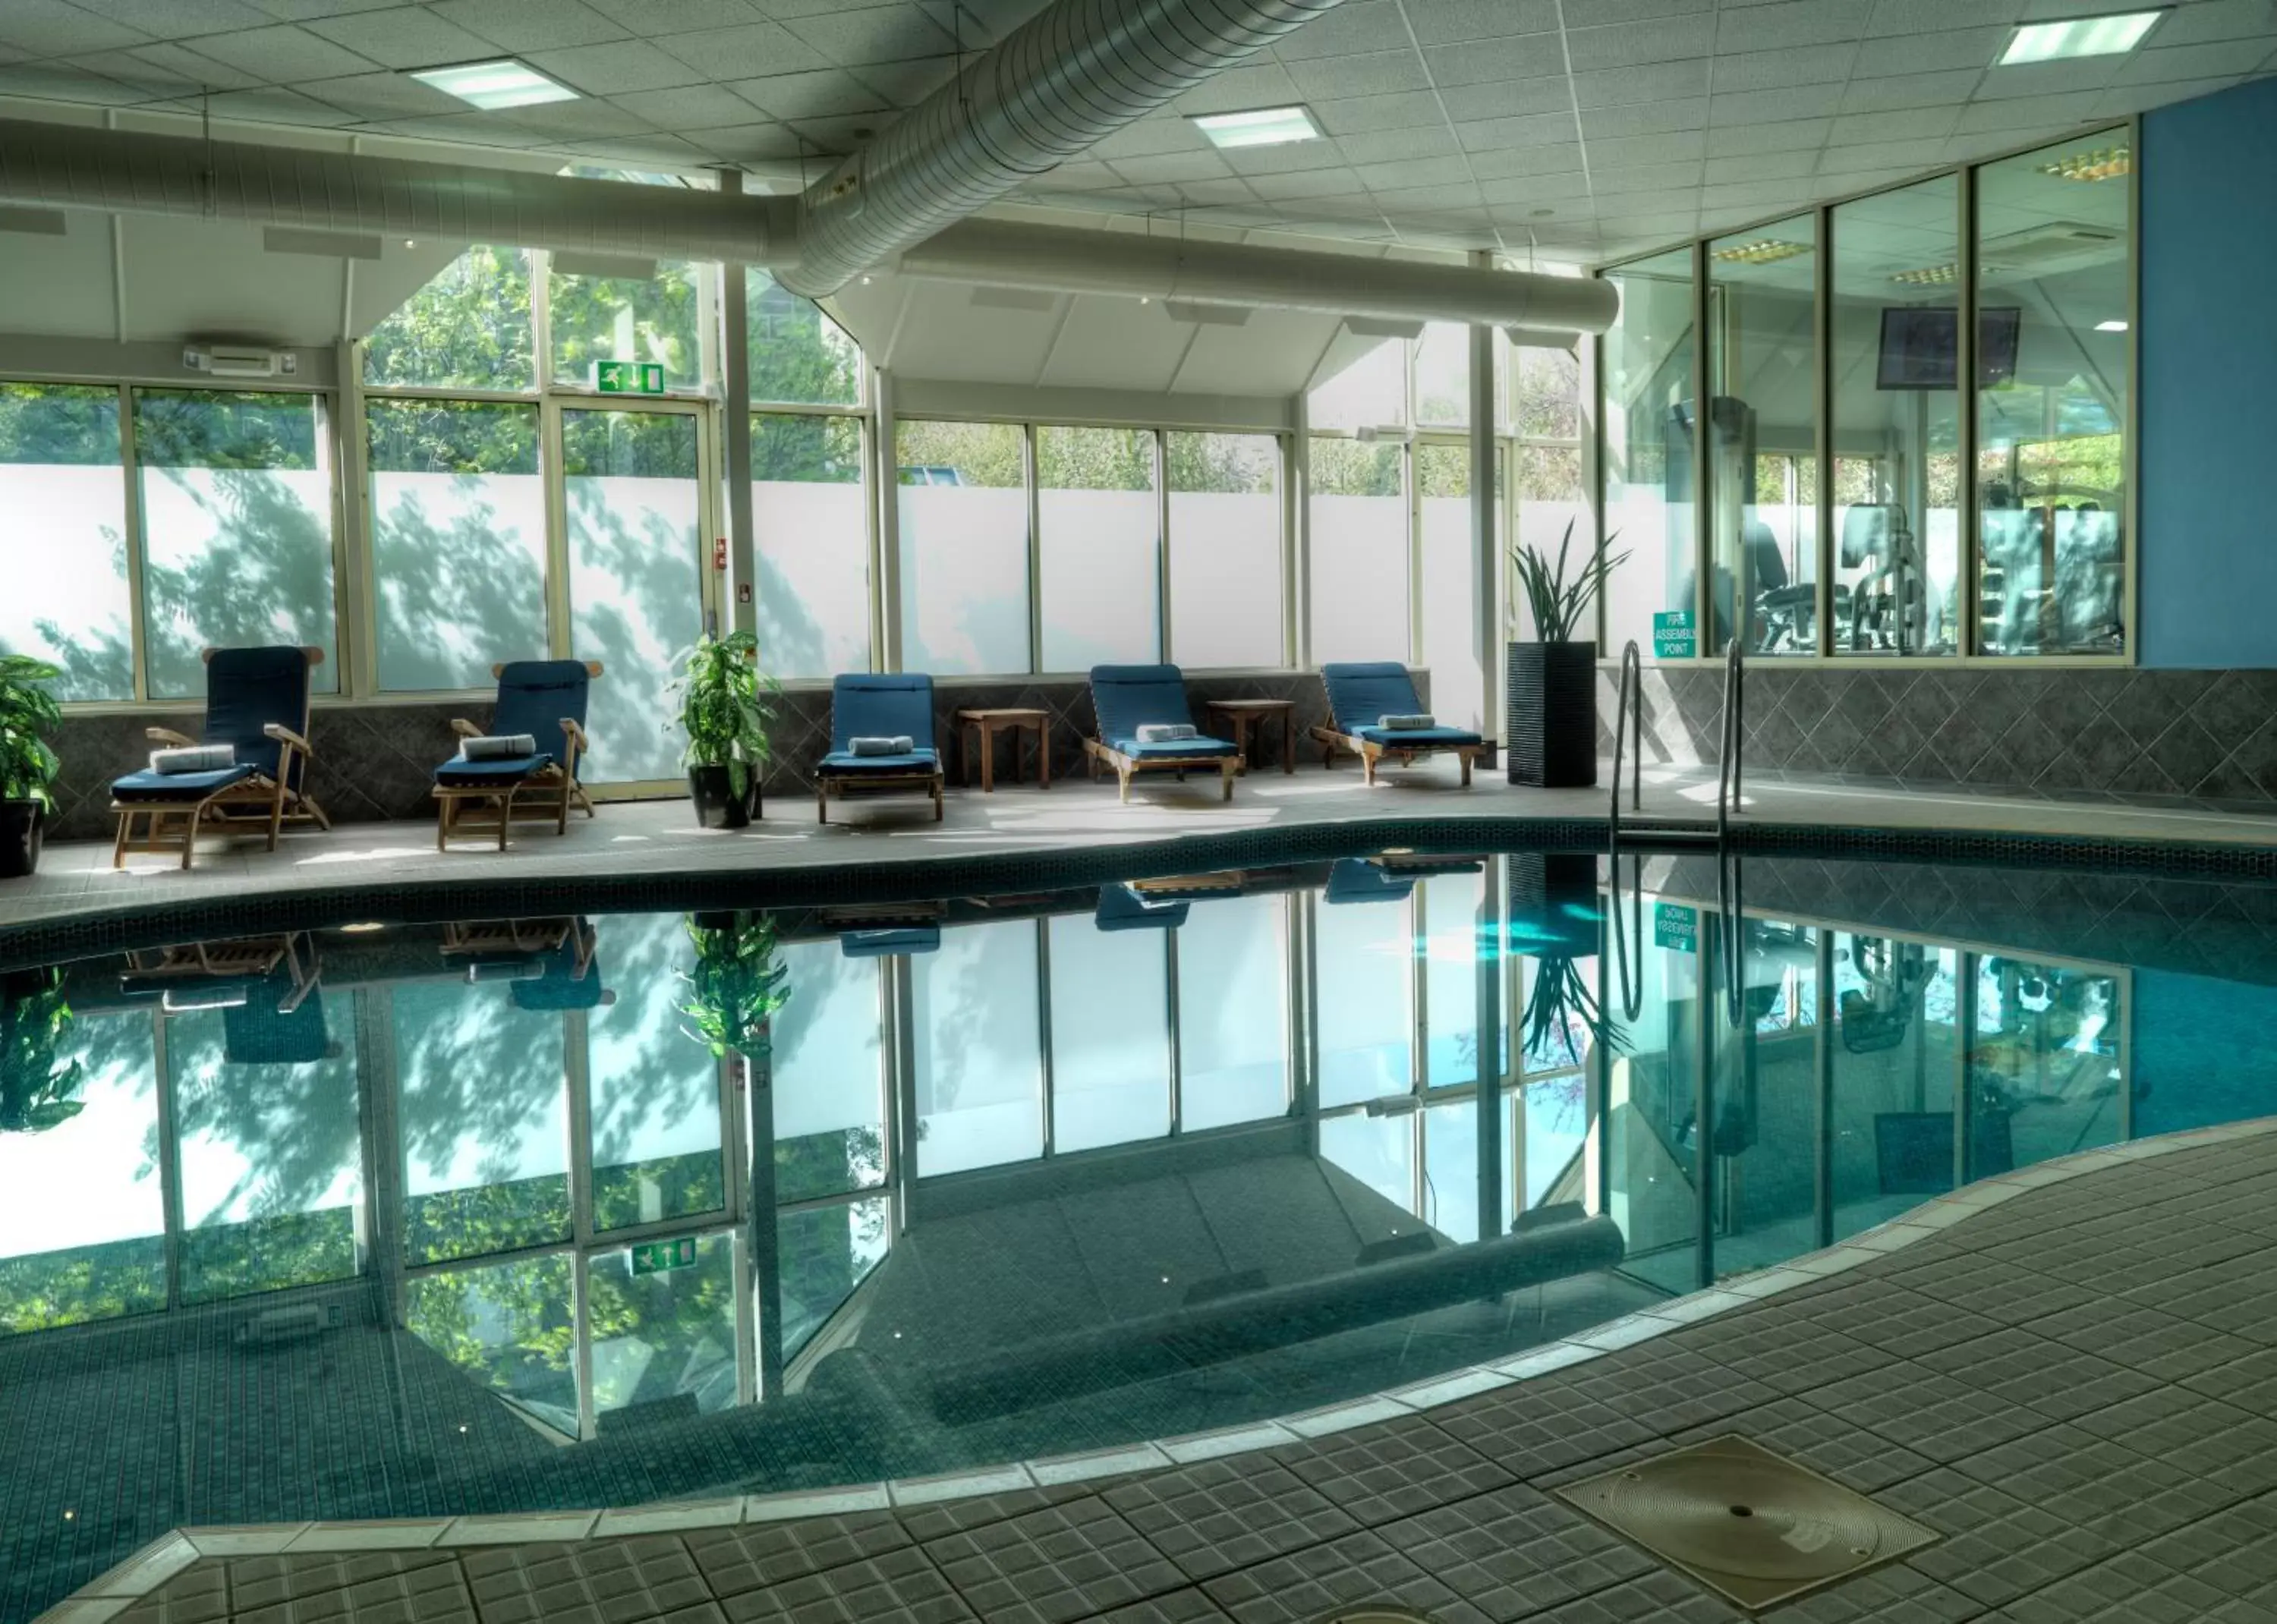 Swimming Pool in The Landmark Hotel and Leisure Club